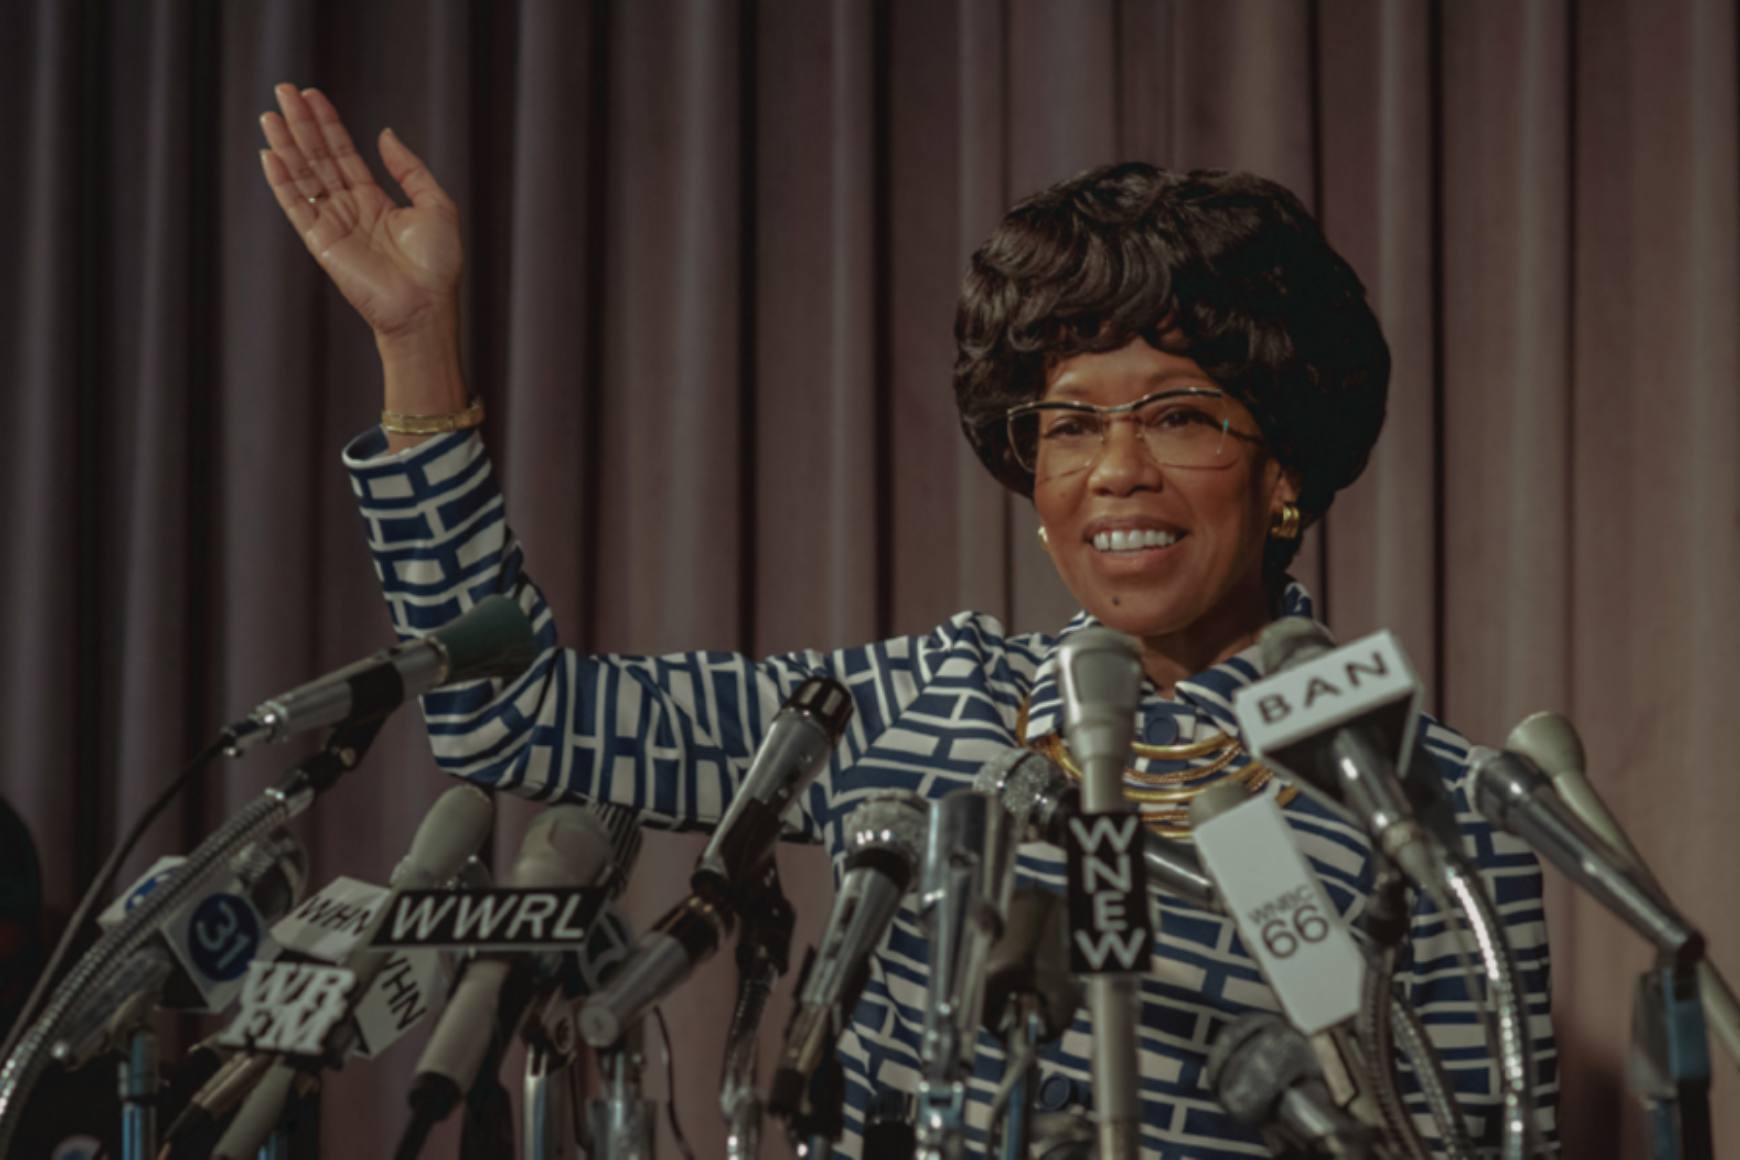 Regina King as Shirley Chisholm in the film "Shirley" waves during a press conference